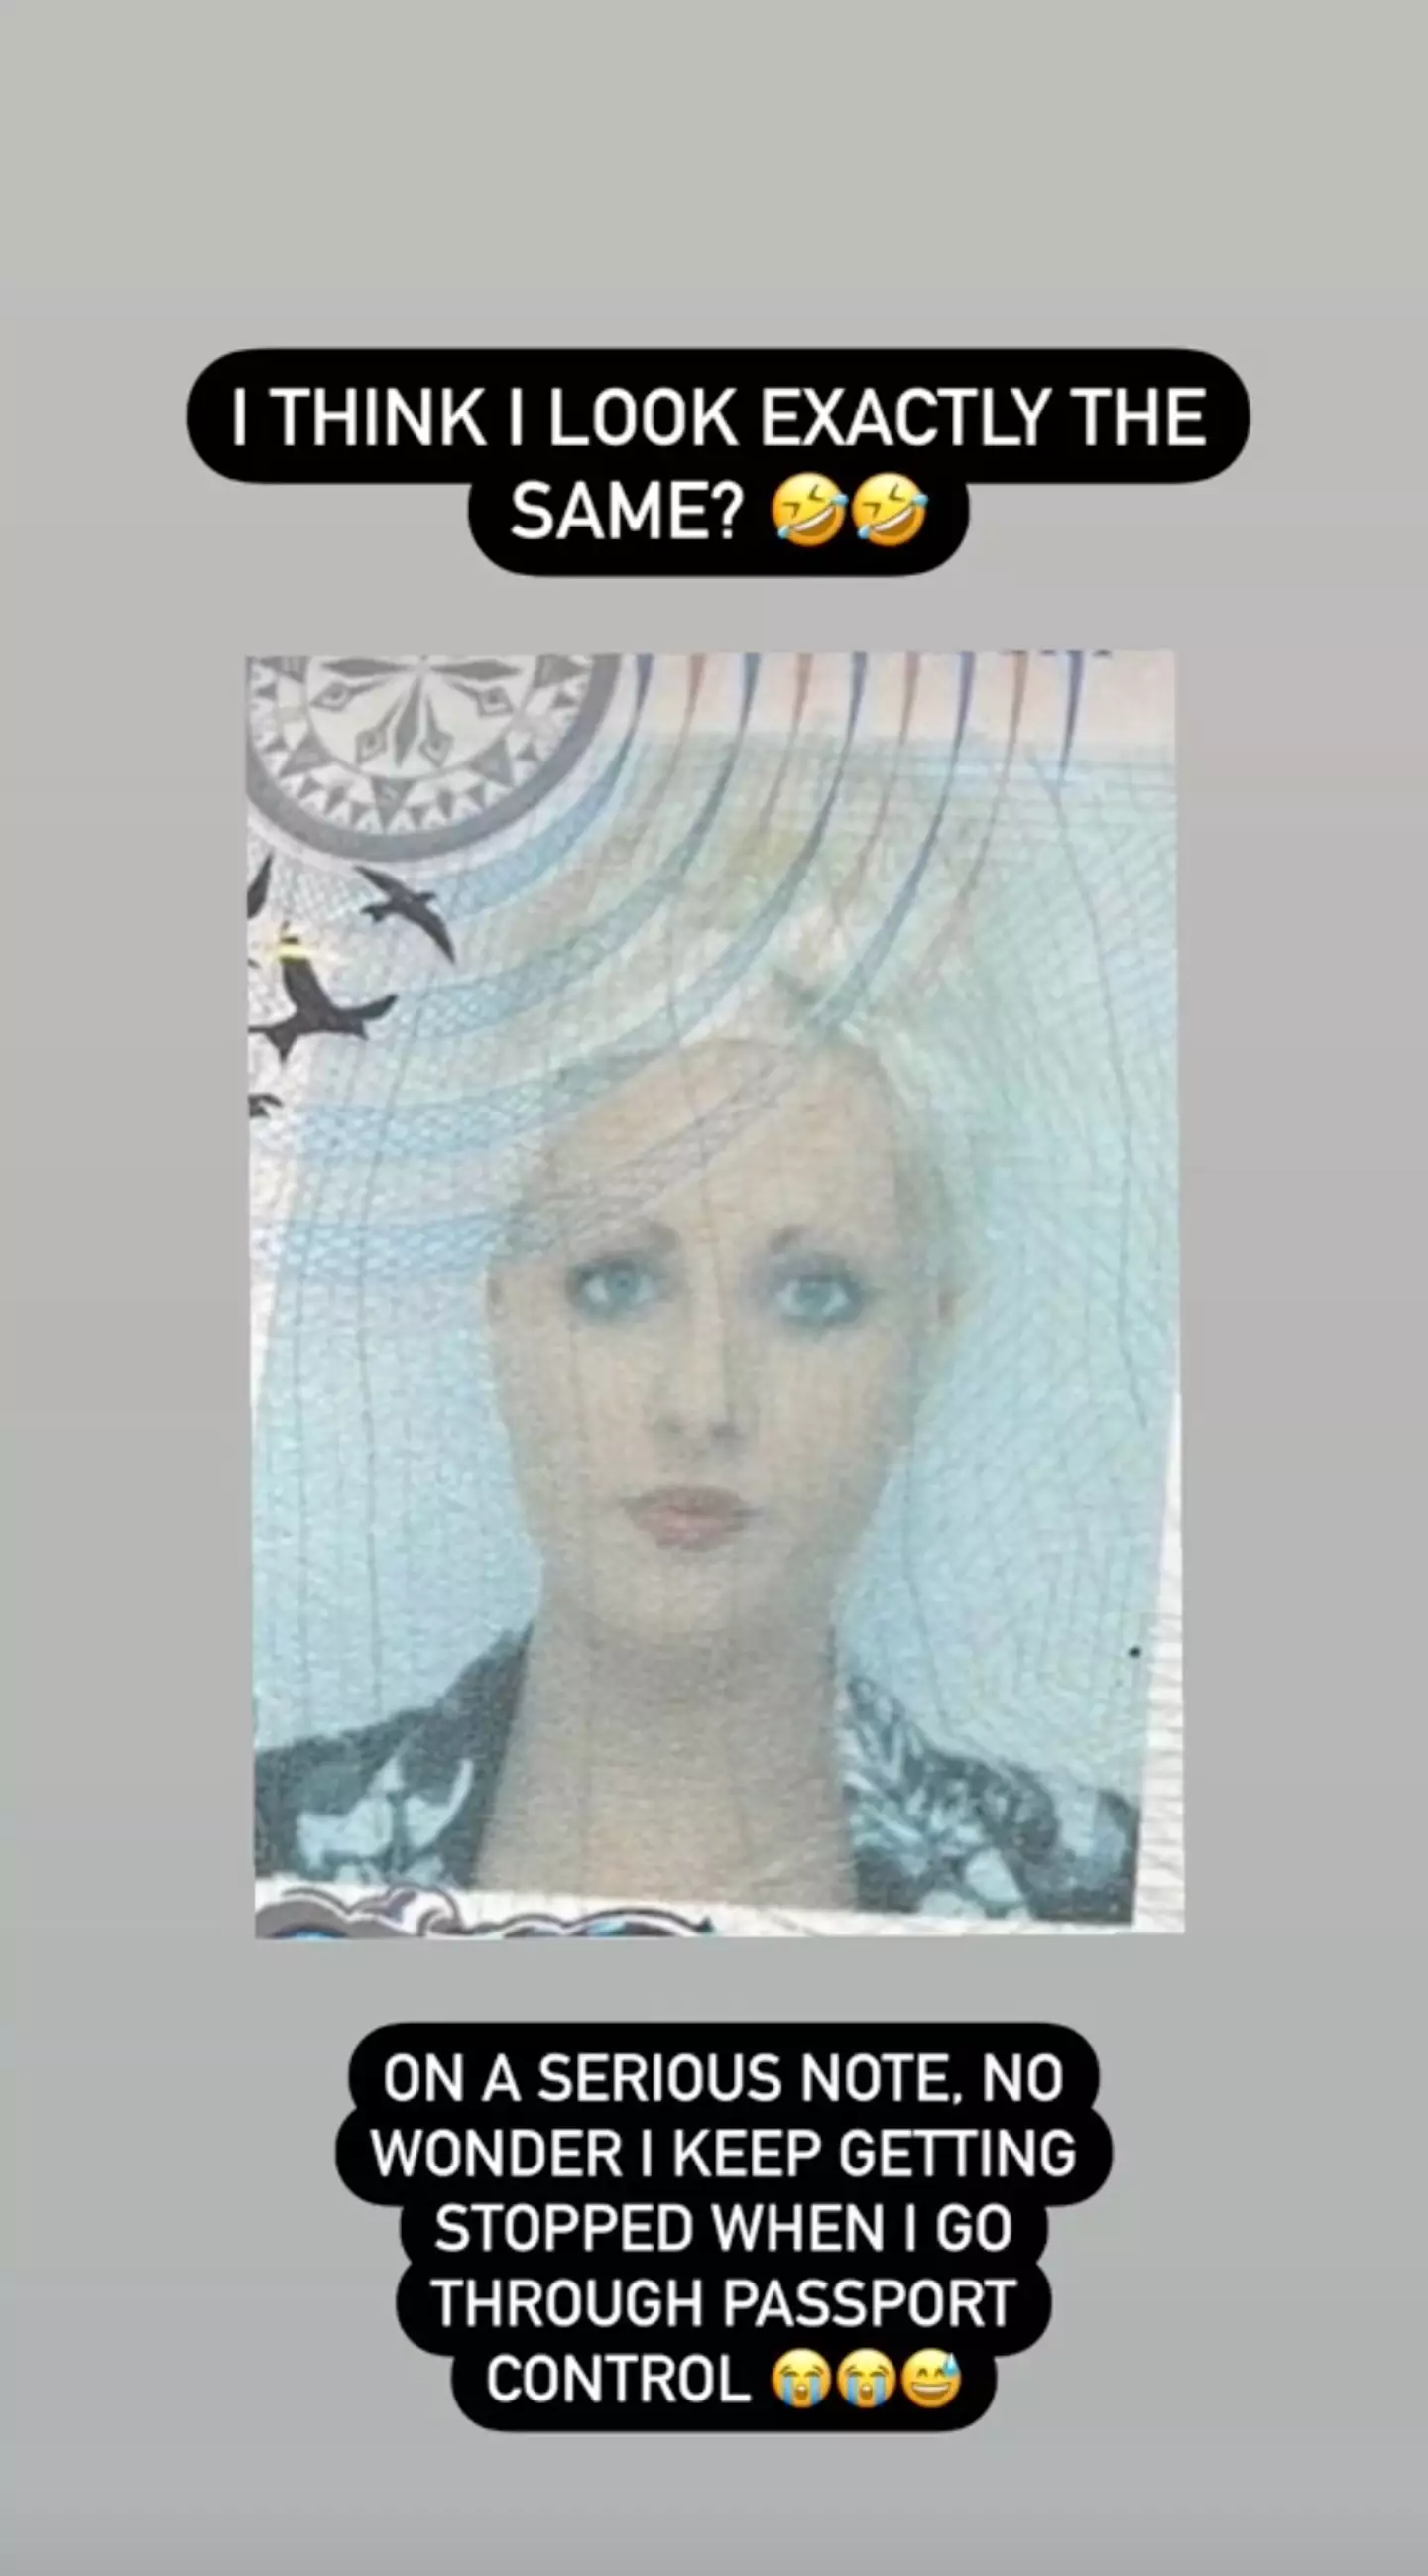 Security told Joanne her previous passport photo looked 'nothing like' her.